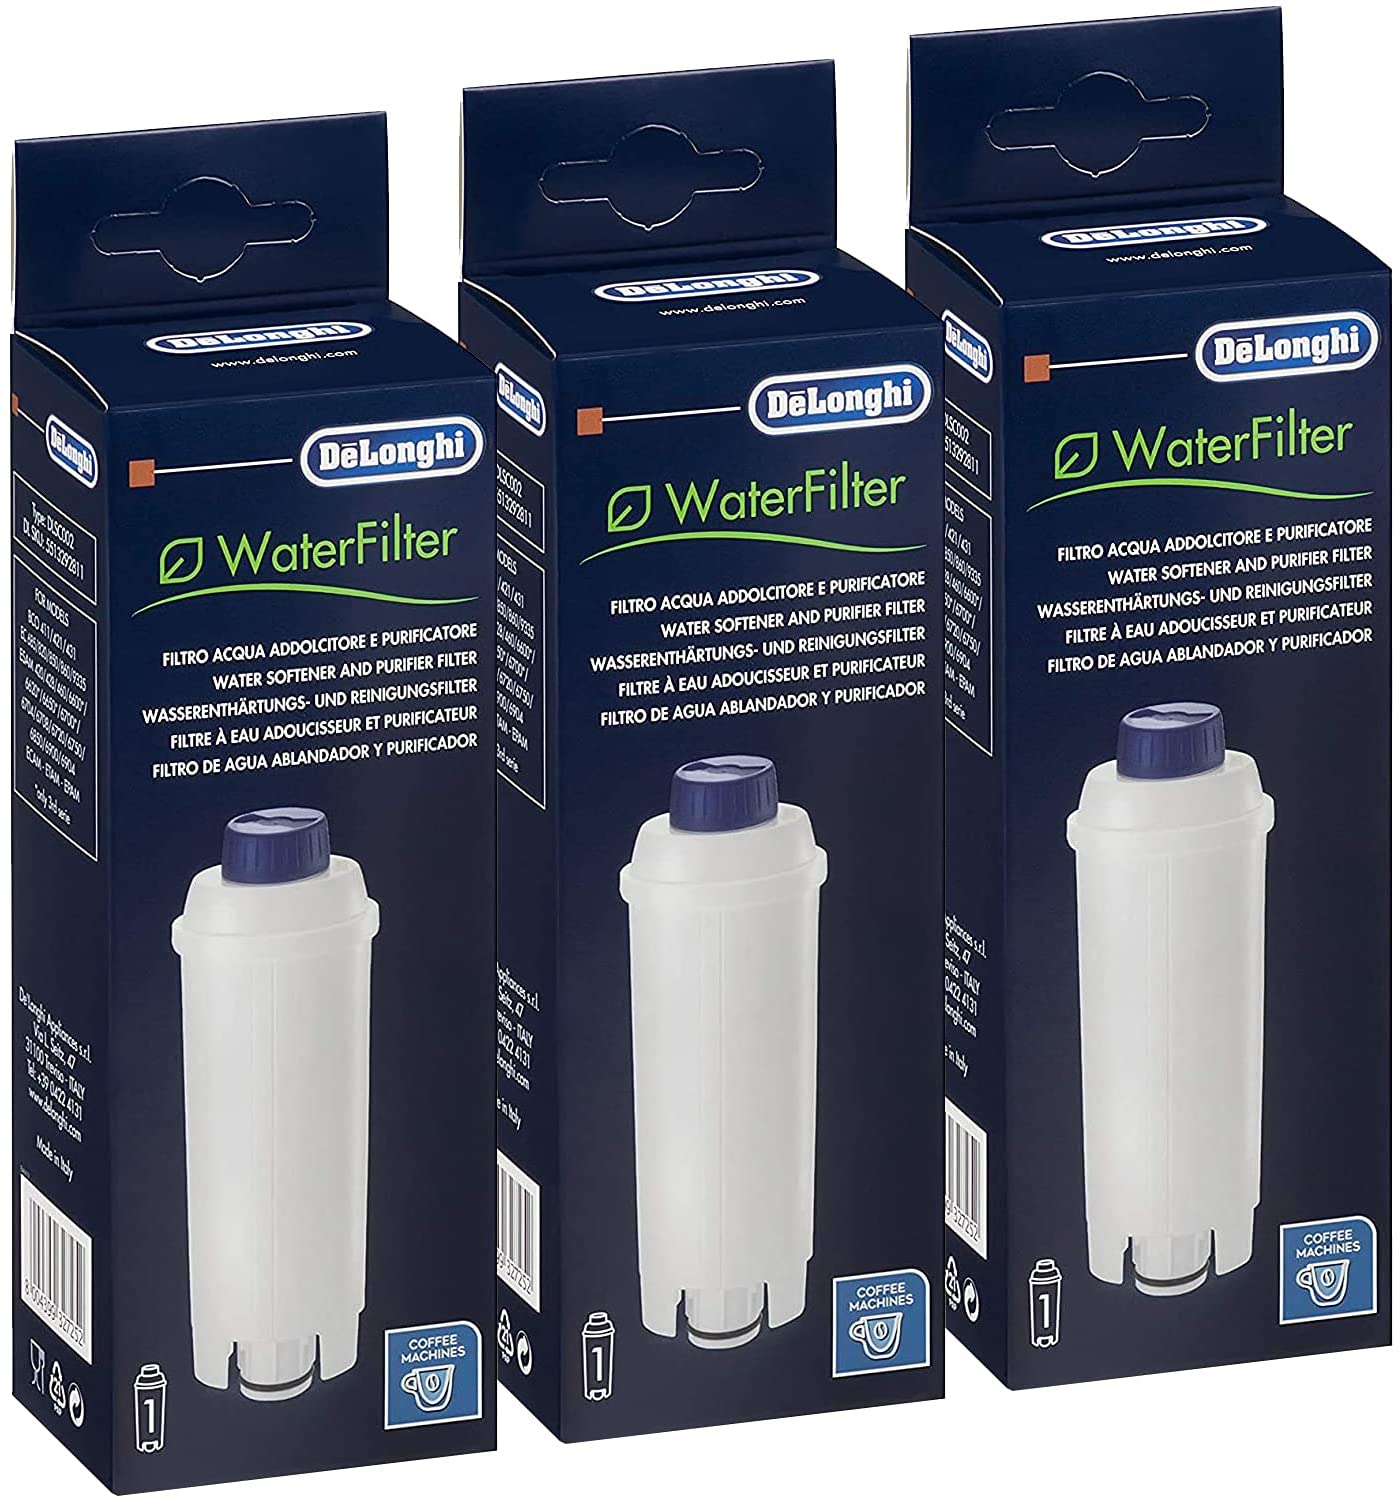 Delonghi-Water-Filter-5513292811-Pack-of-3